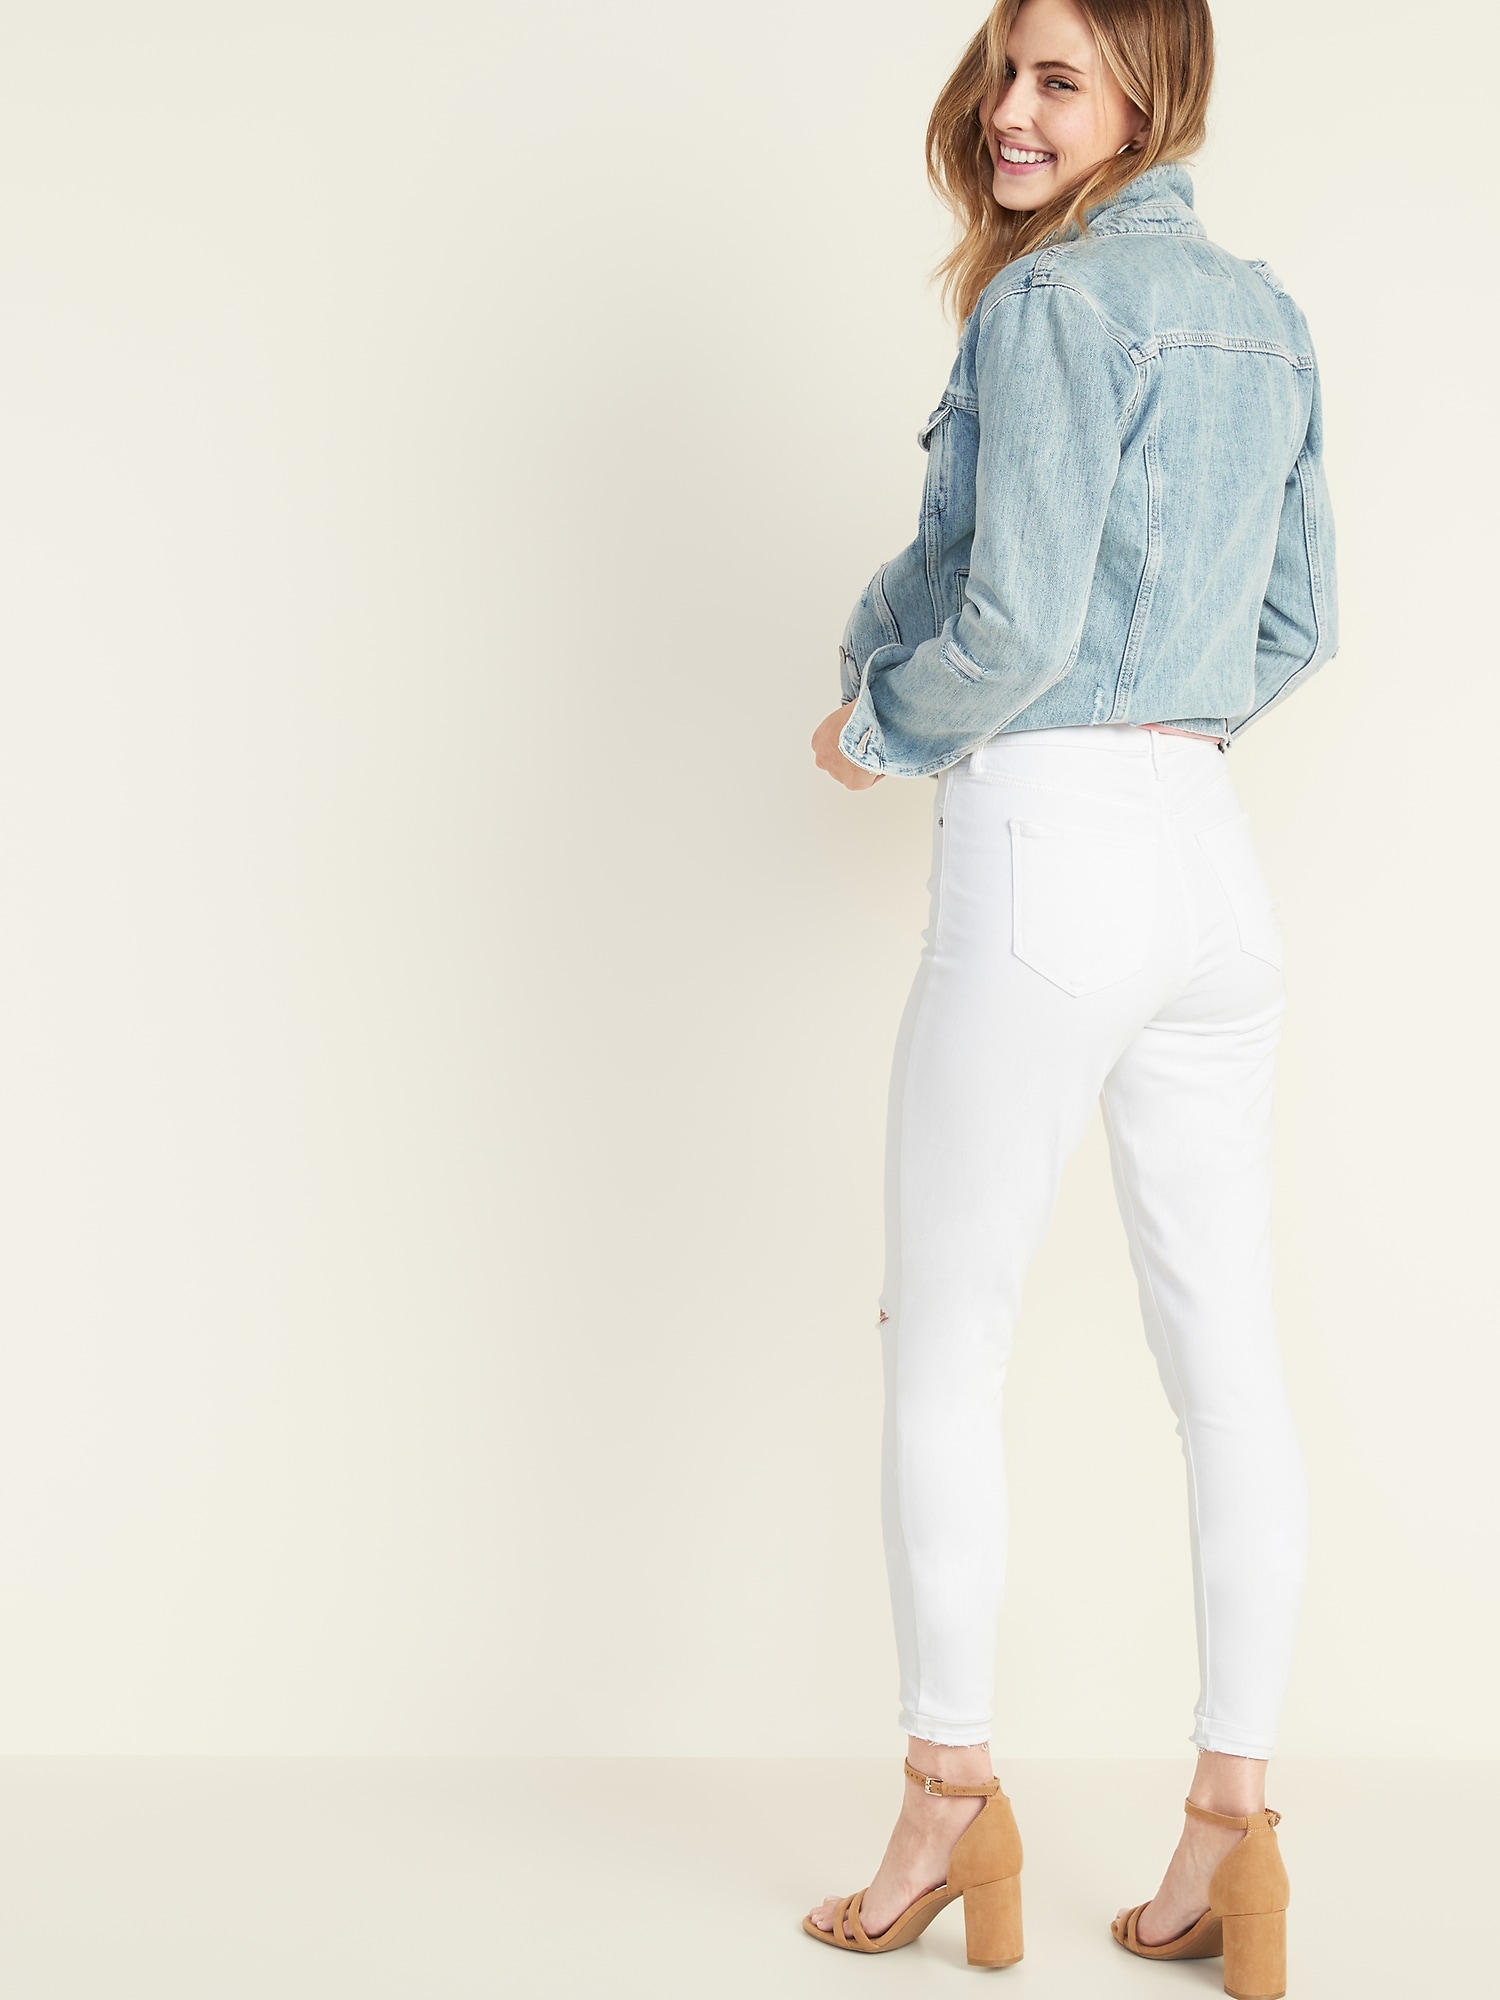 womens white ankle jeans